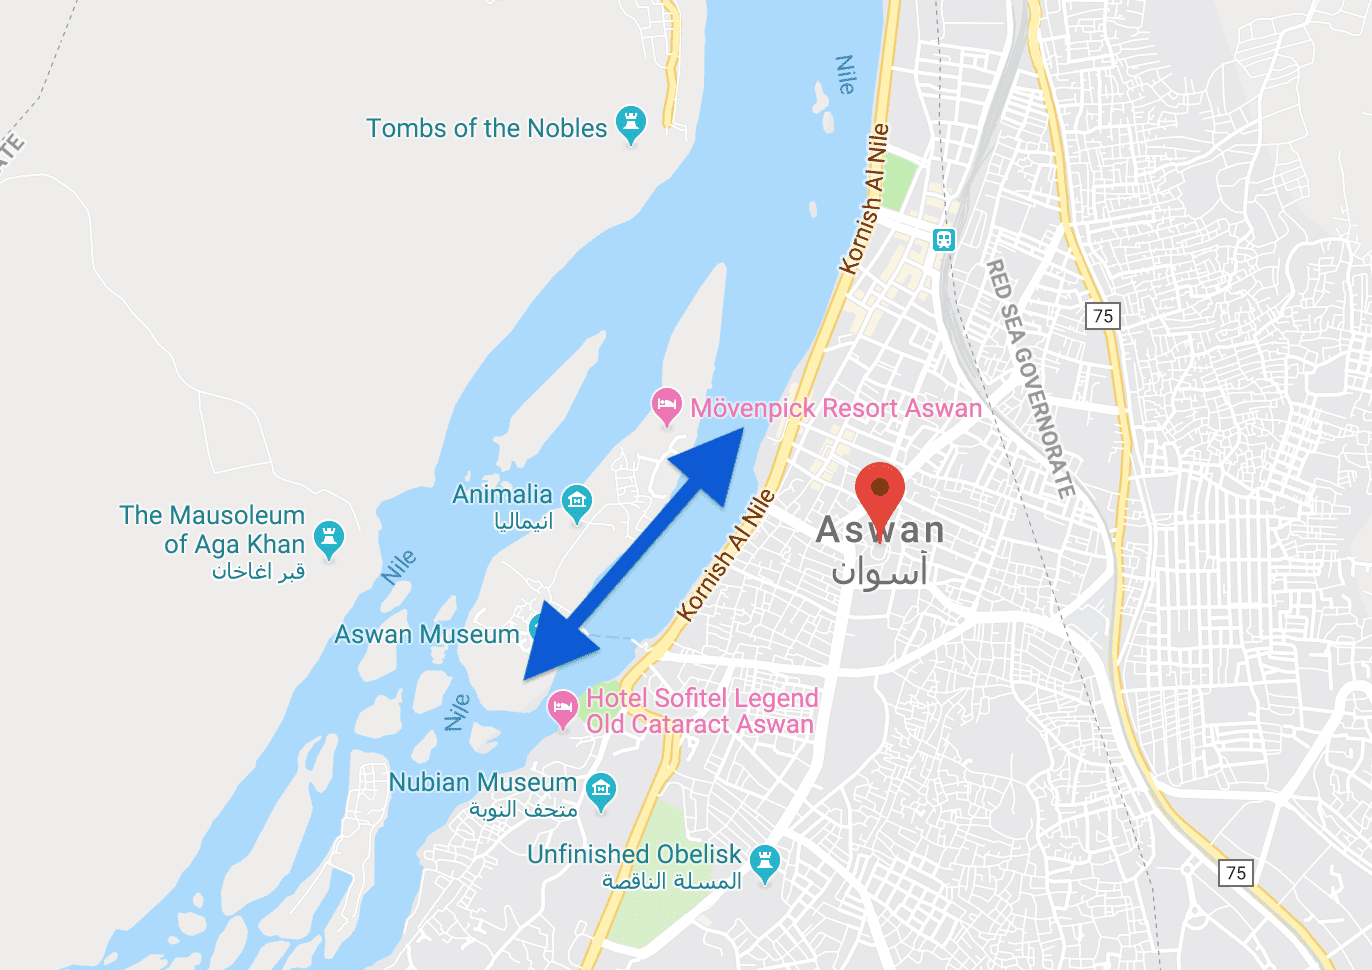 Map shows the Nile River in Aswan area, where felucca rides happen with tourists.